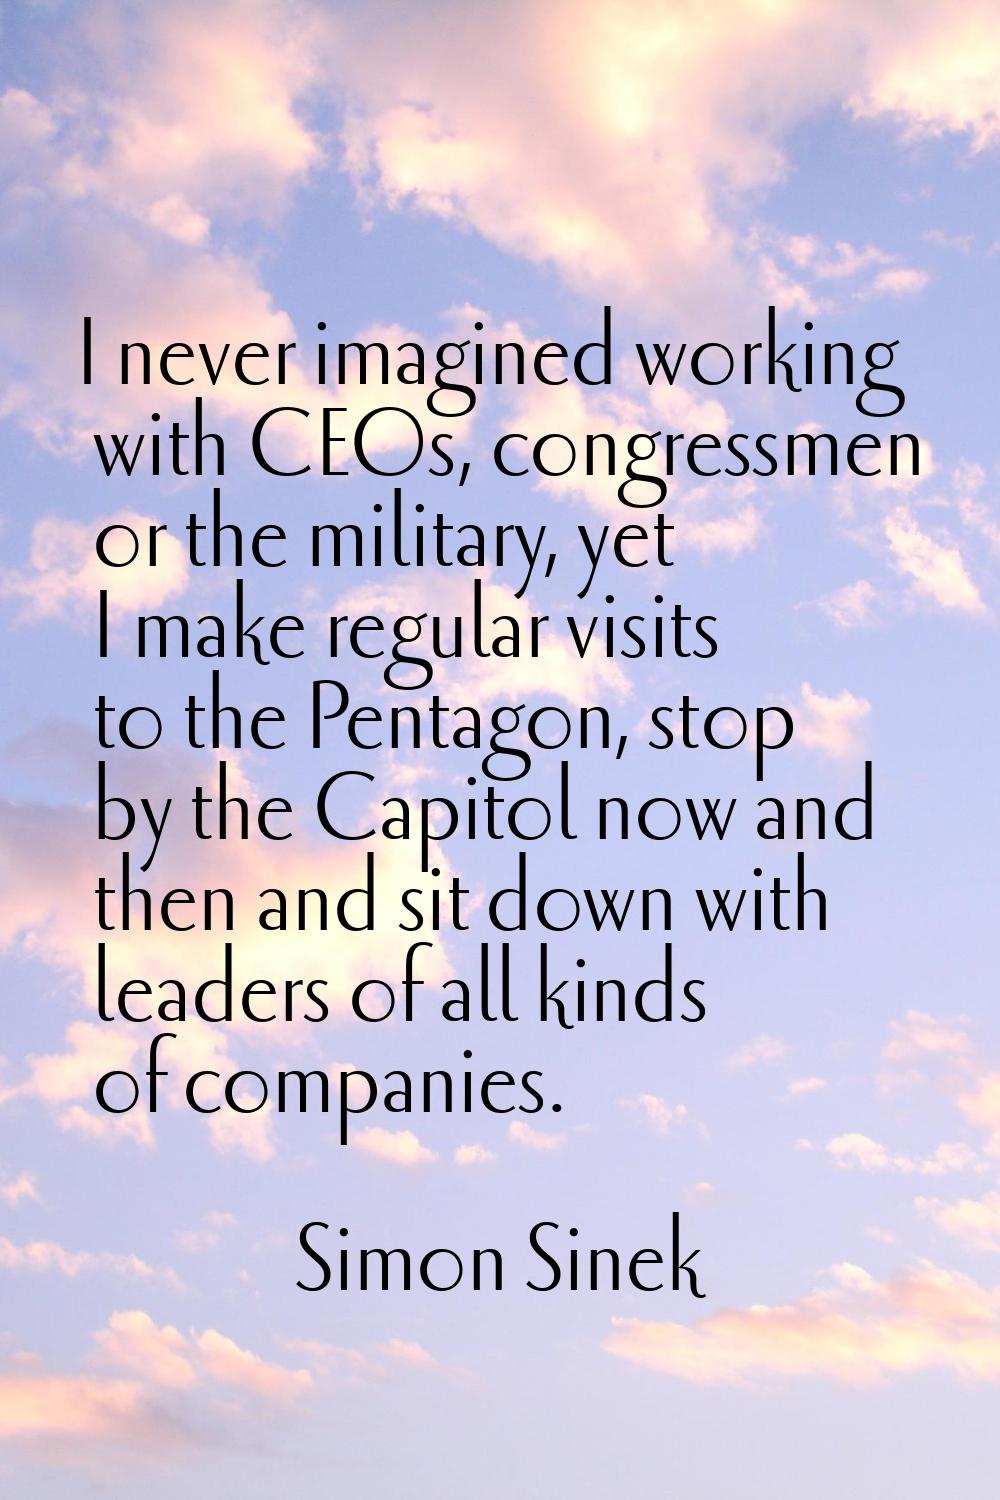 I never imagined working with CEOs, congressmen or the military, yet I make regular visits to the P